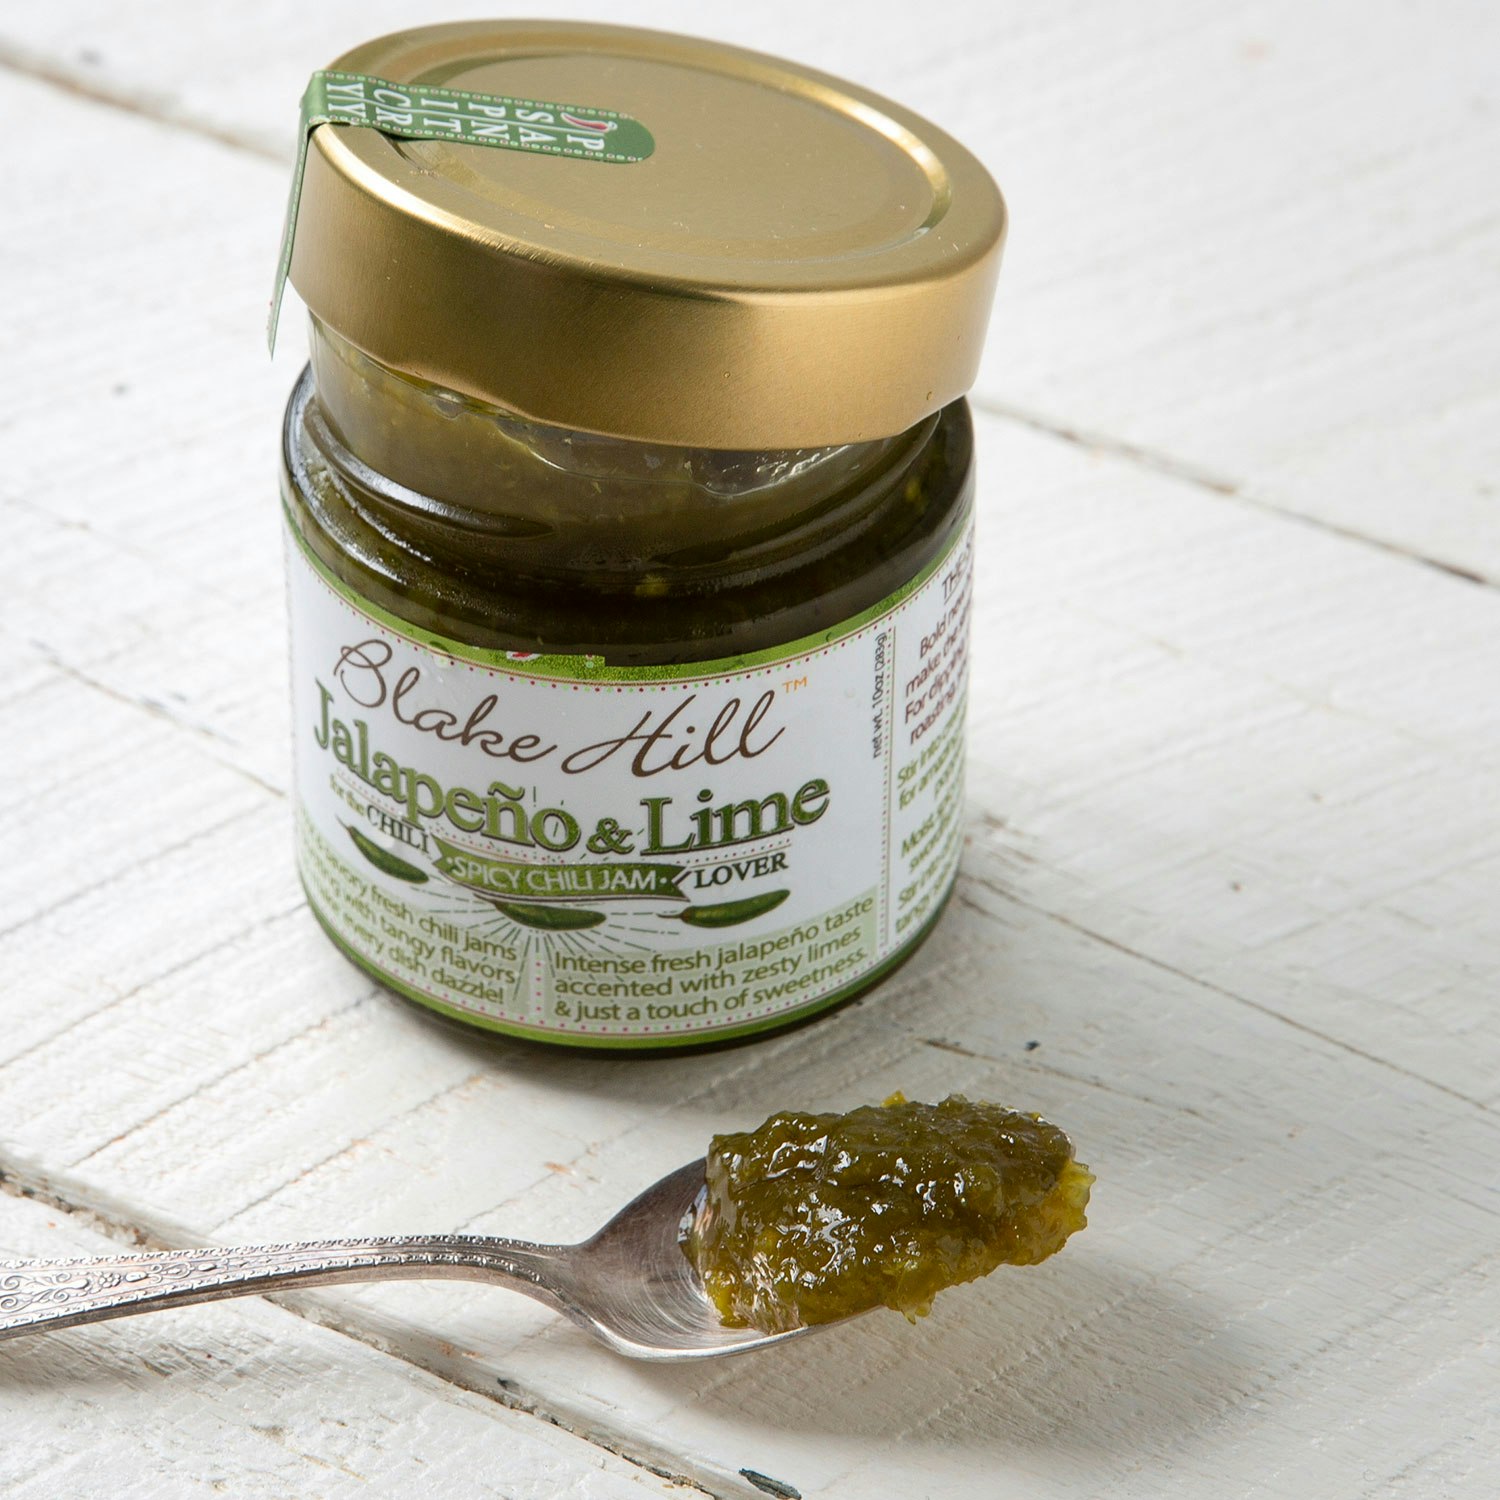 blake hill preserves jalapeno and lime chili jam specialty foods